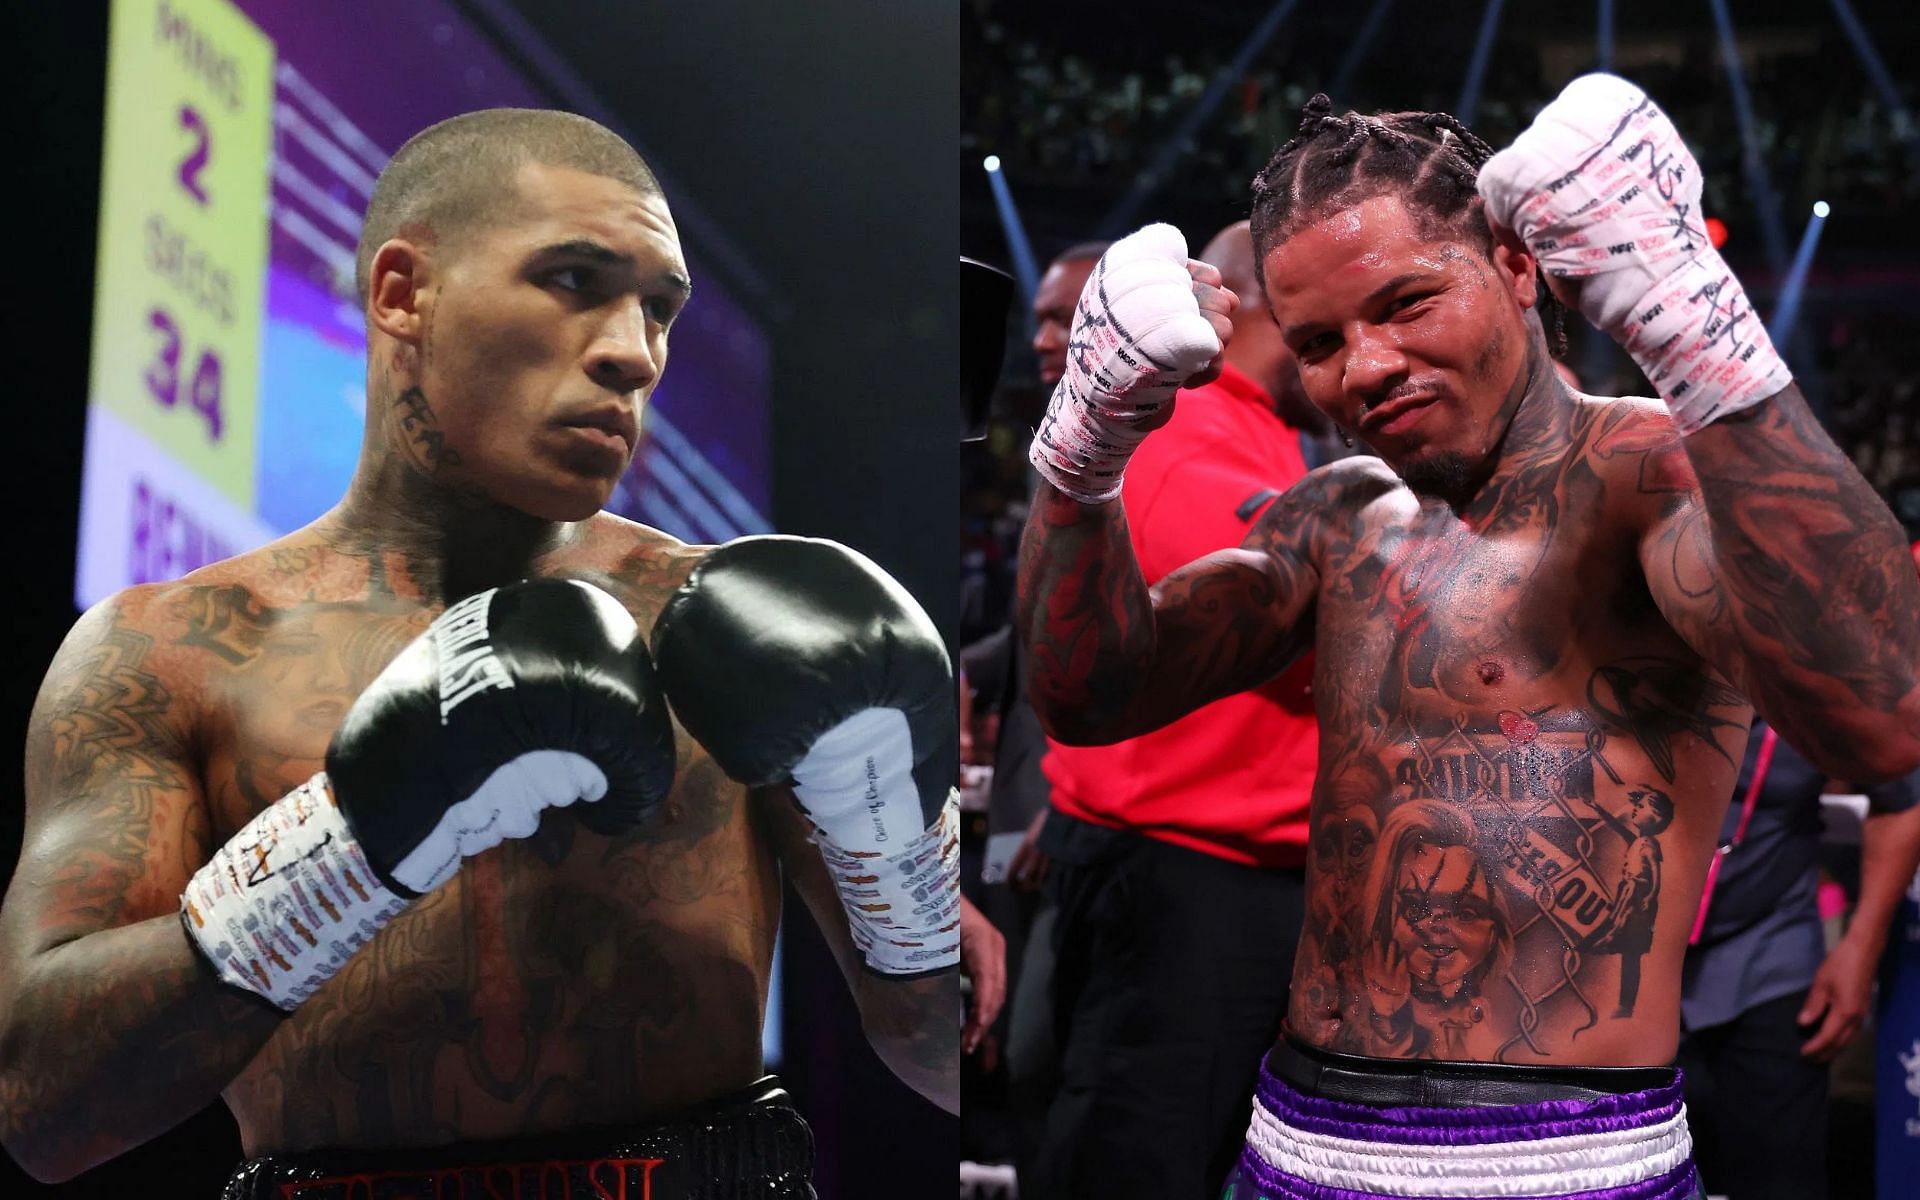 Conor Benn (left) and Gervonta Davis (right) could soon enter negotiations for a fight deal, according to Eddie Hearn [Images Courtesy: @GettyImages]